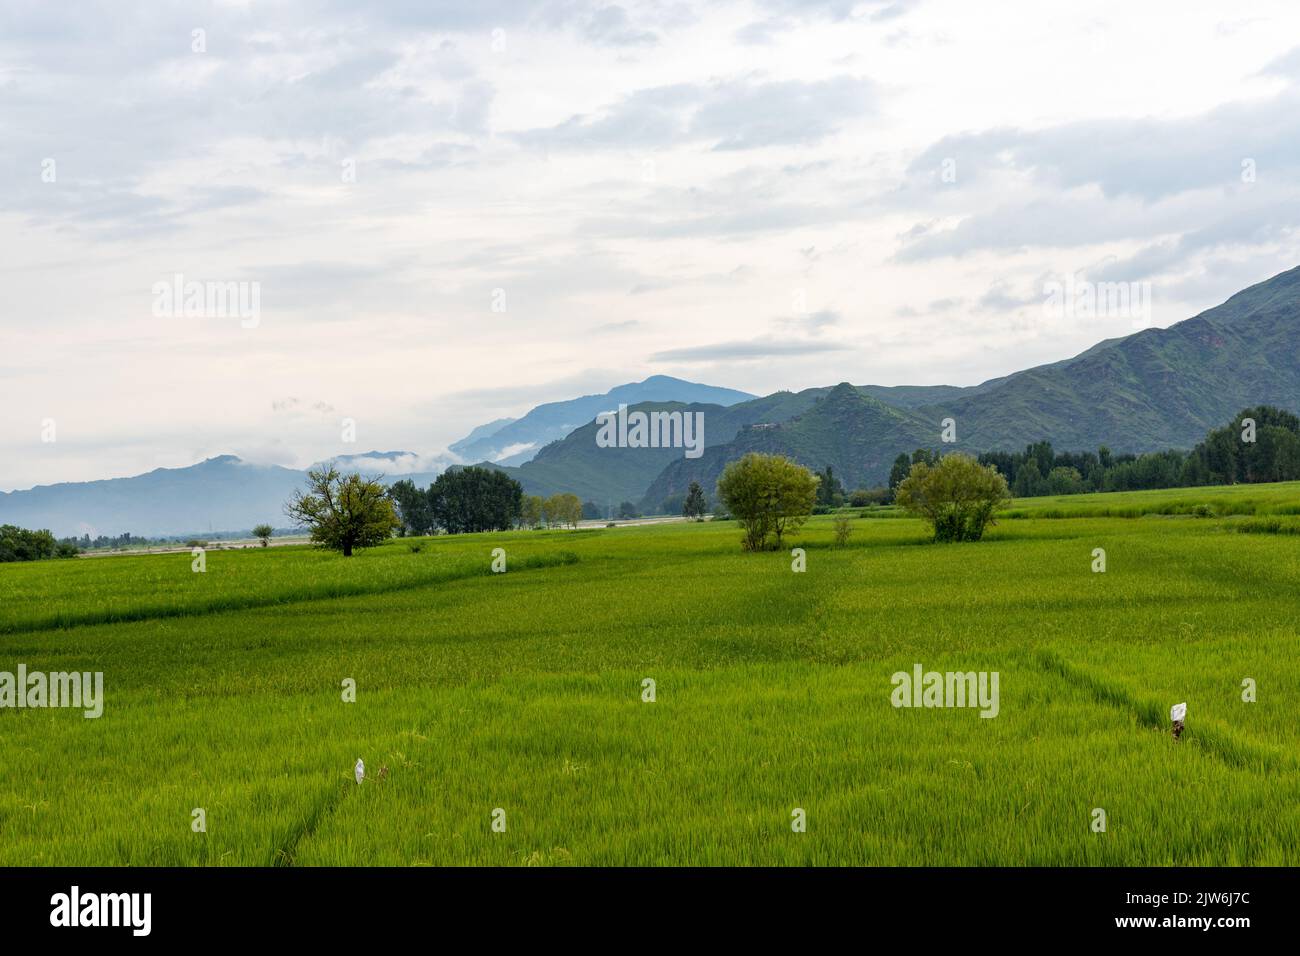 Rice lush green fields with cloudy sky landscape scenery Stock Photo